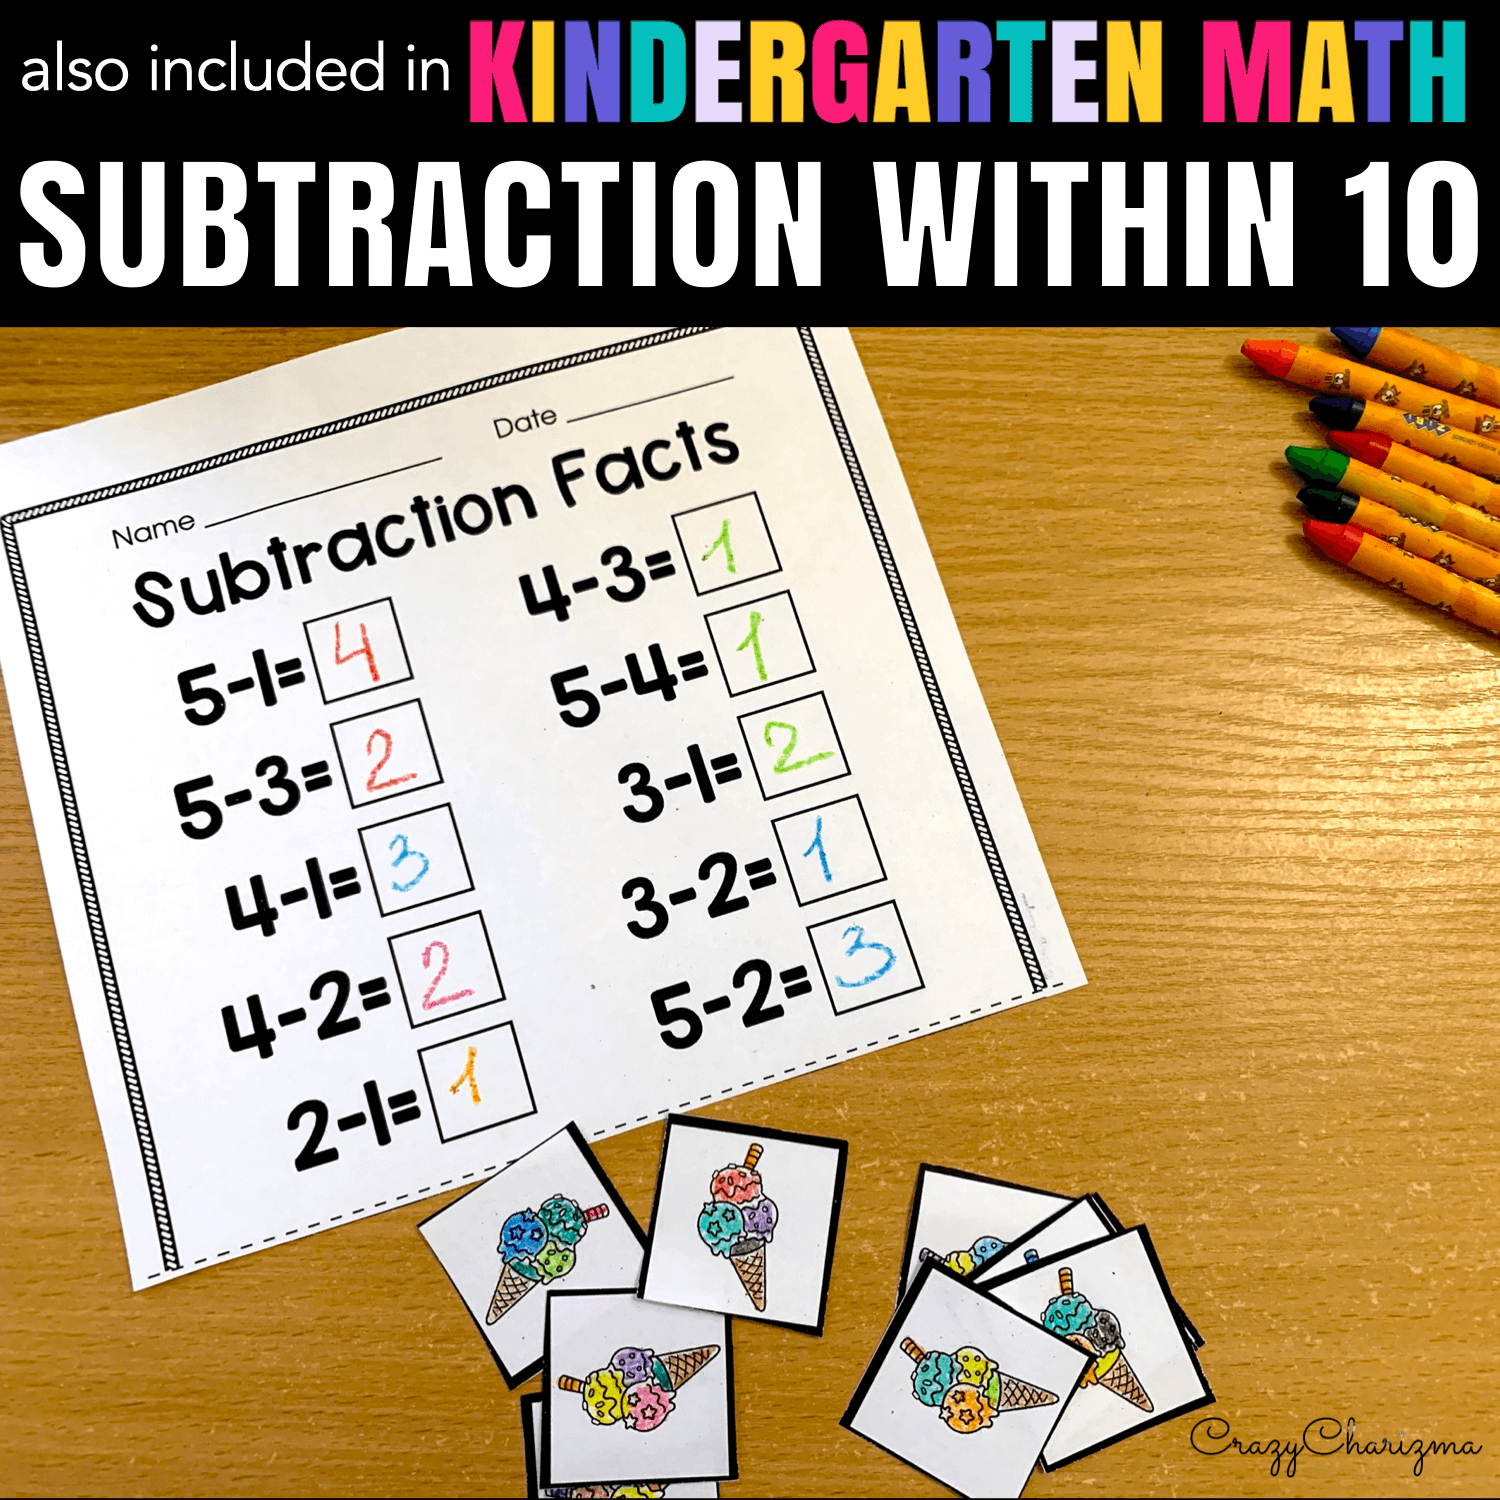 Practice subtraction within 10 facts with counters. Find inside 80 pages of practice!